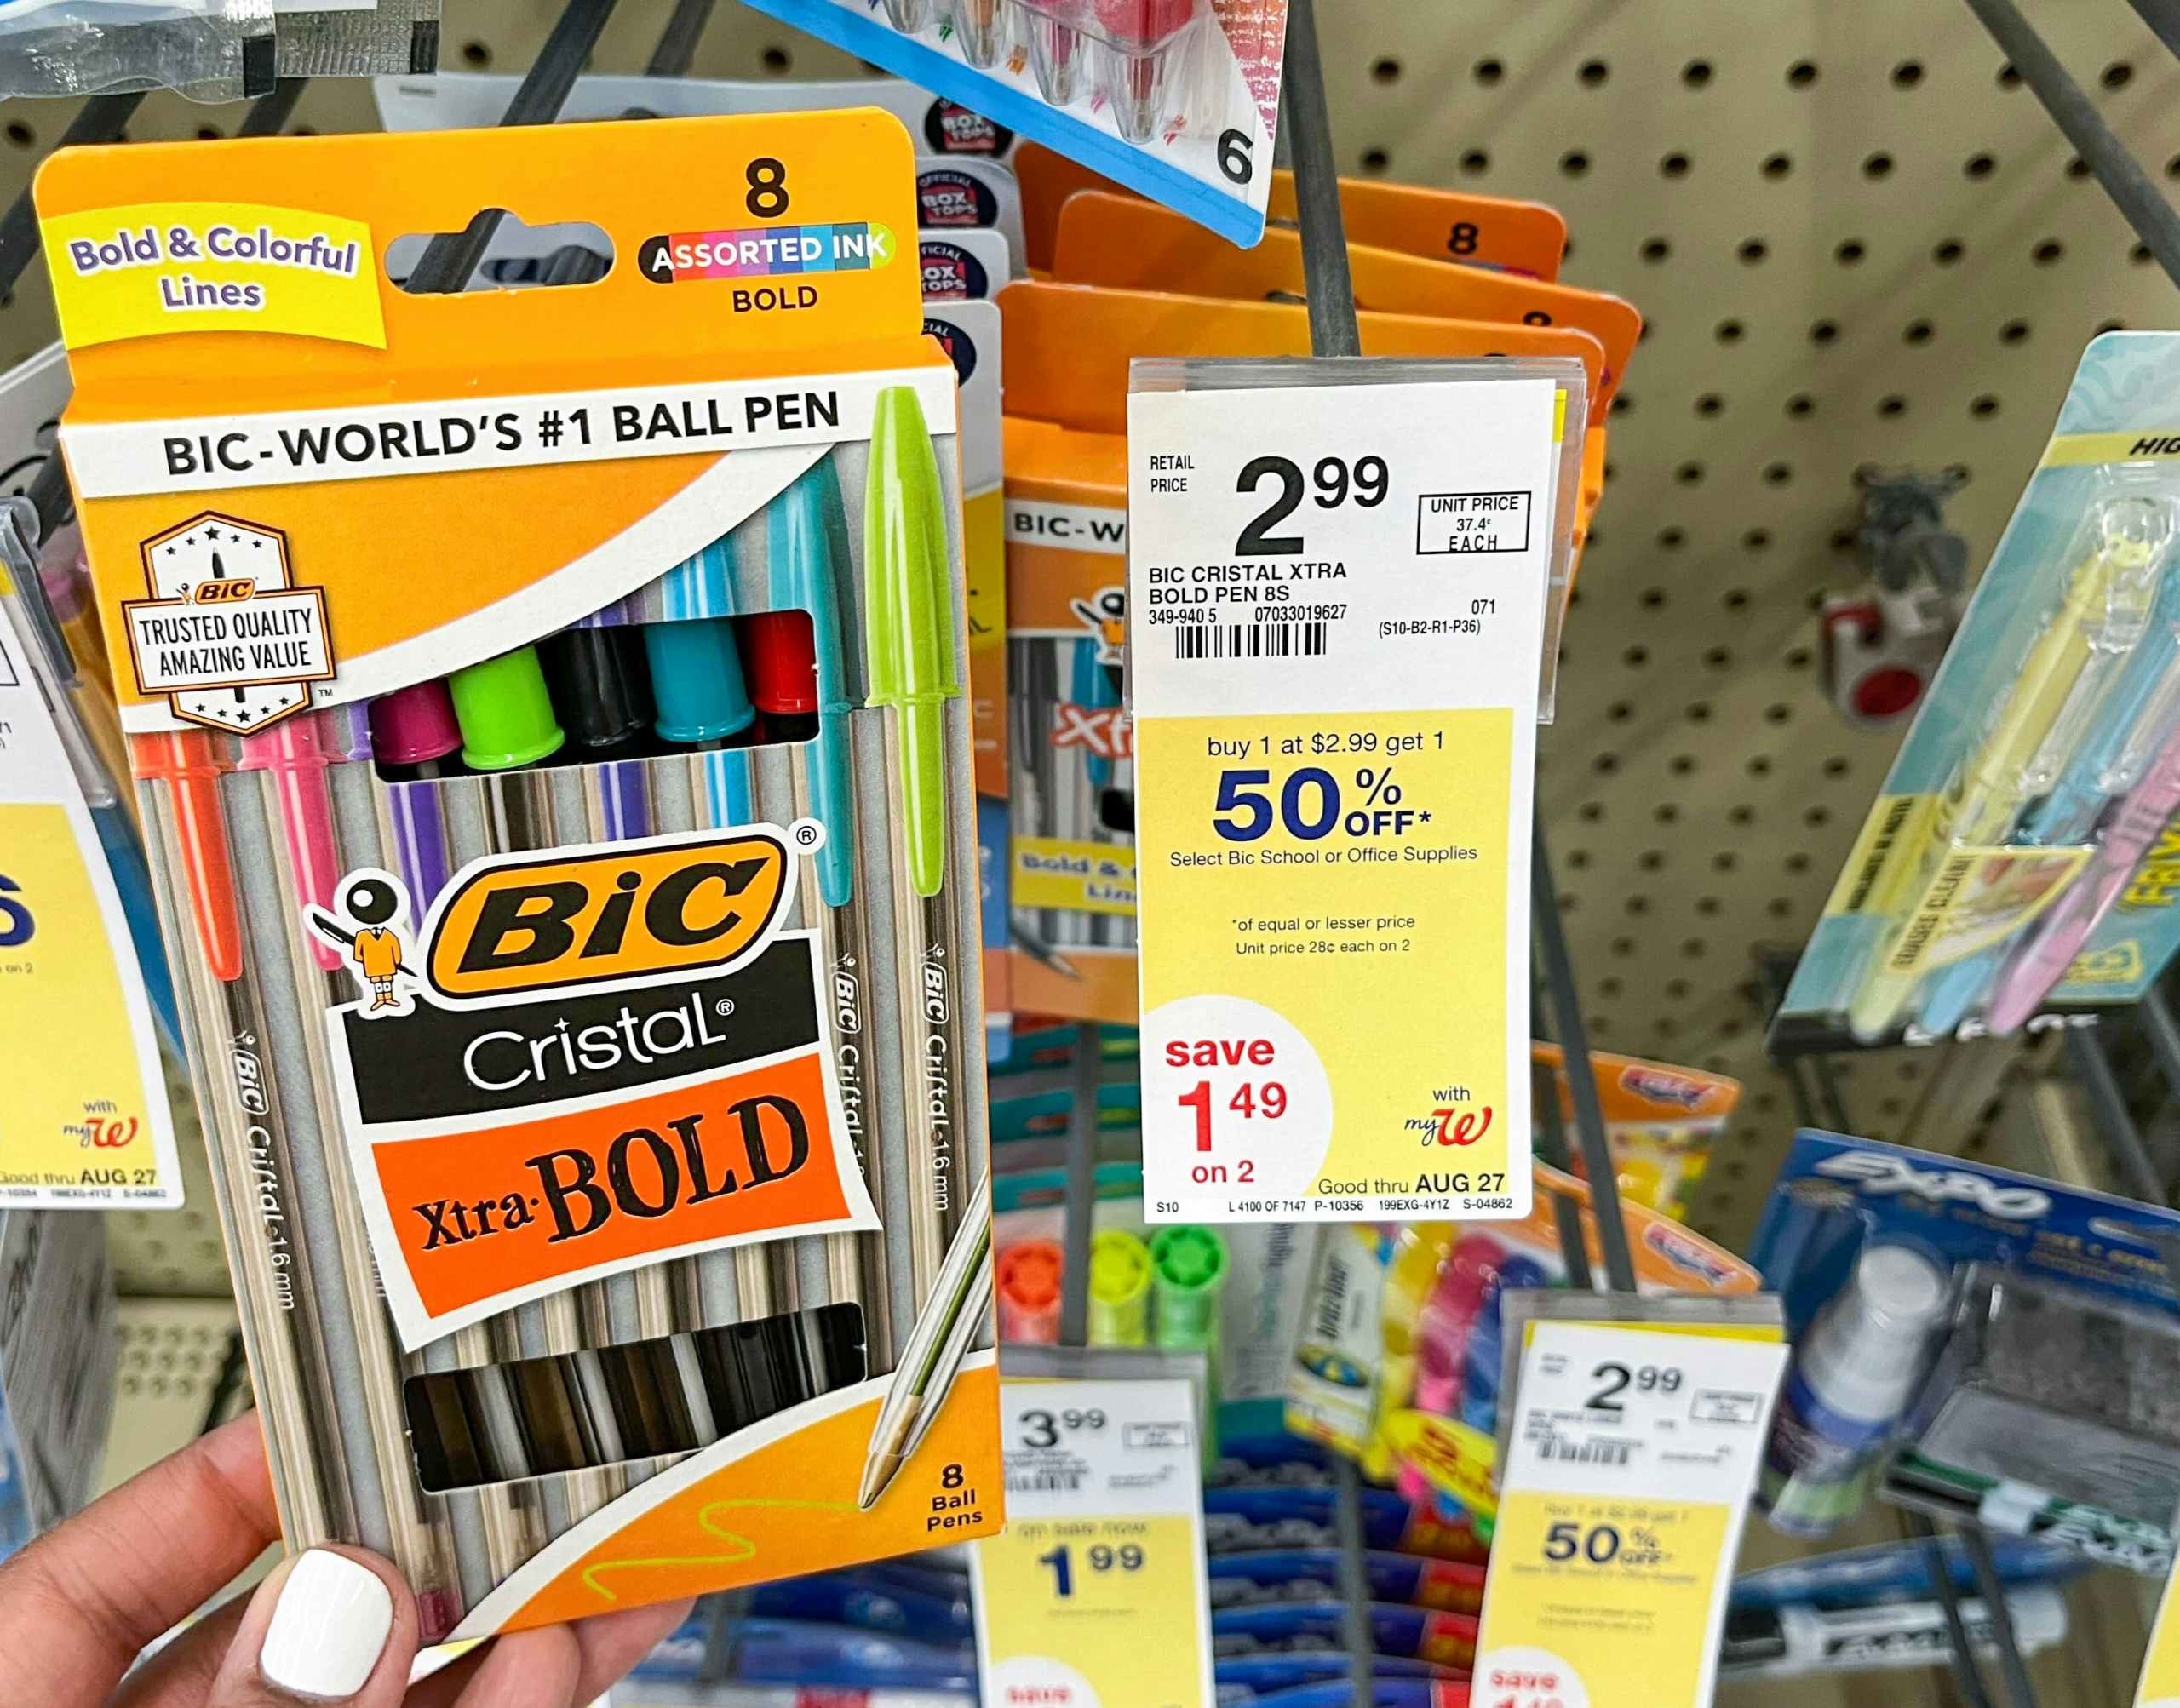 hand holding a box of BIC cristal pens next to sales tag